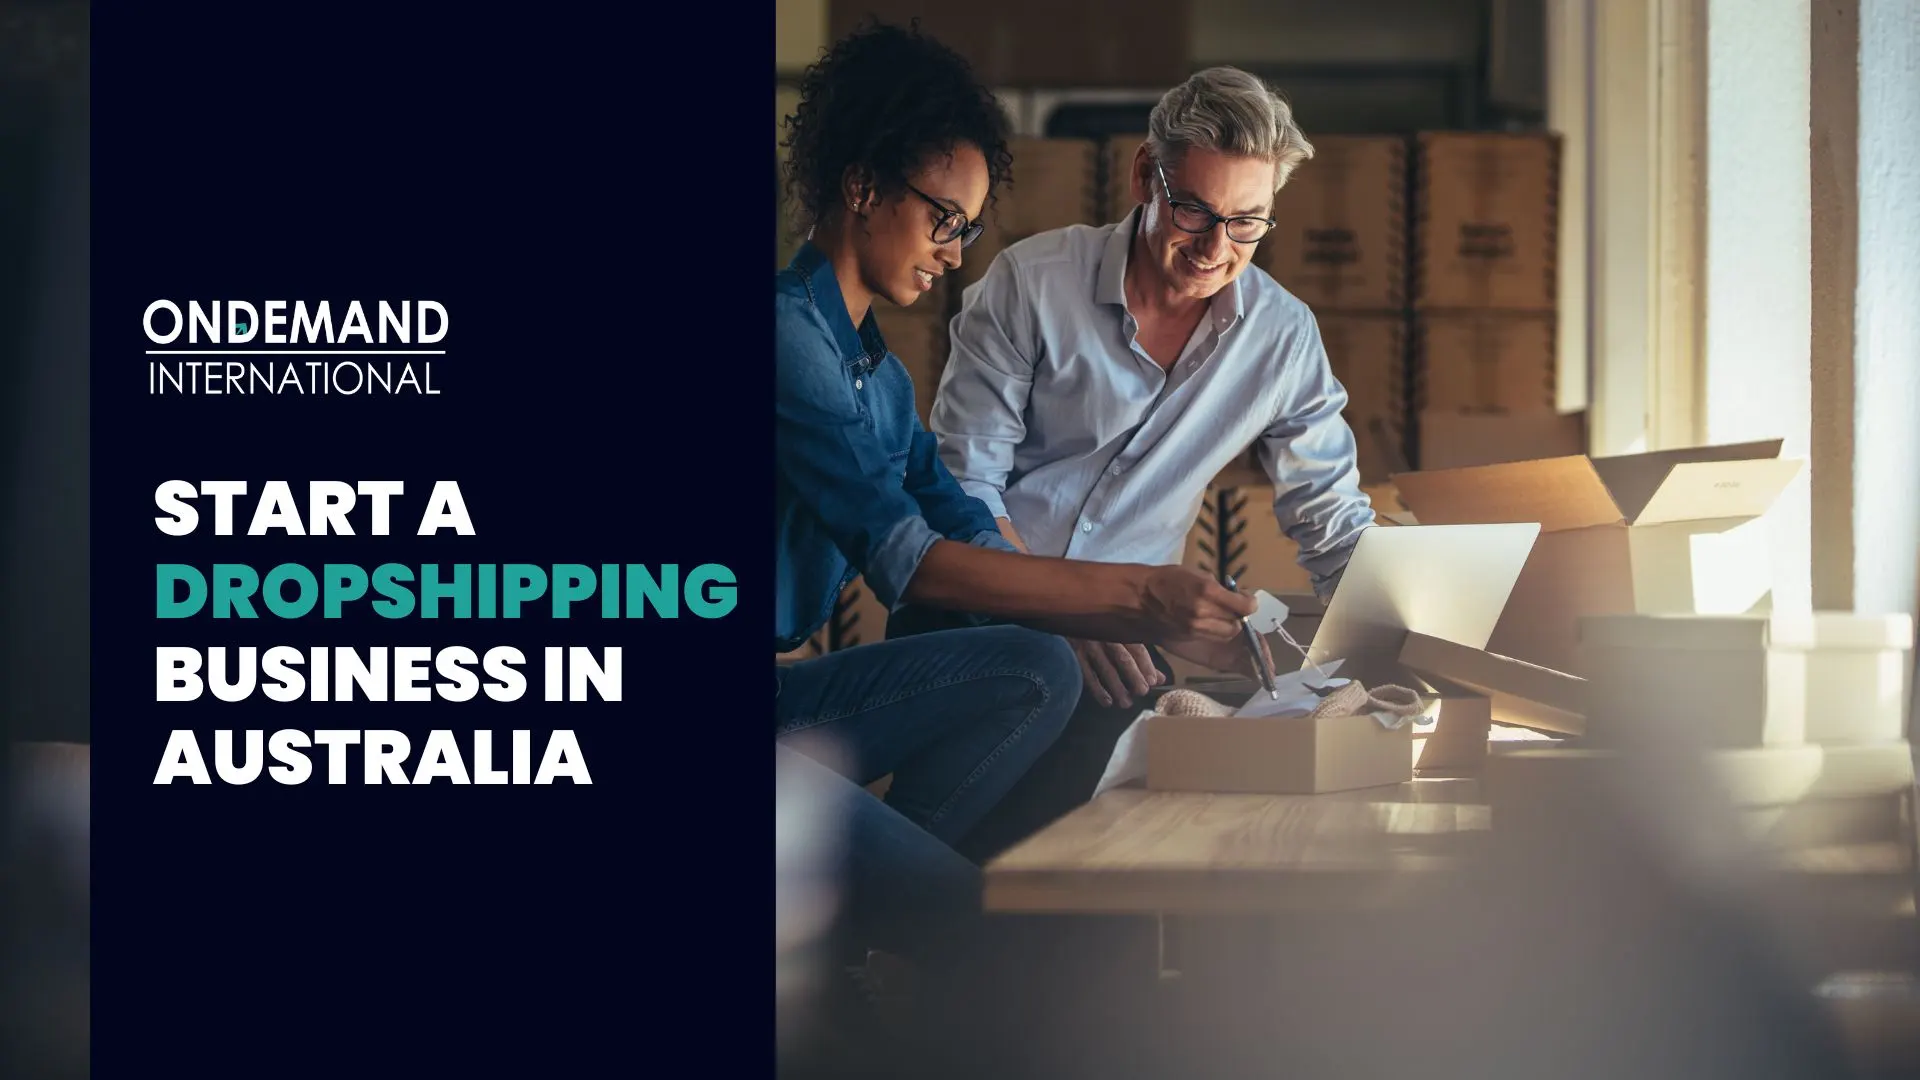 Start a Dropshipping business in Australia